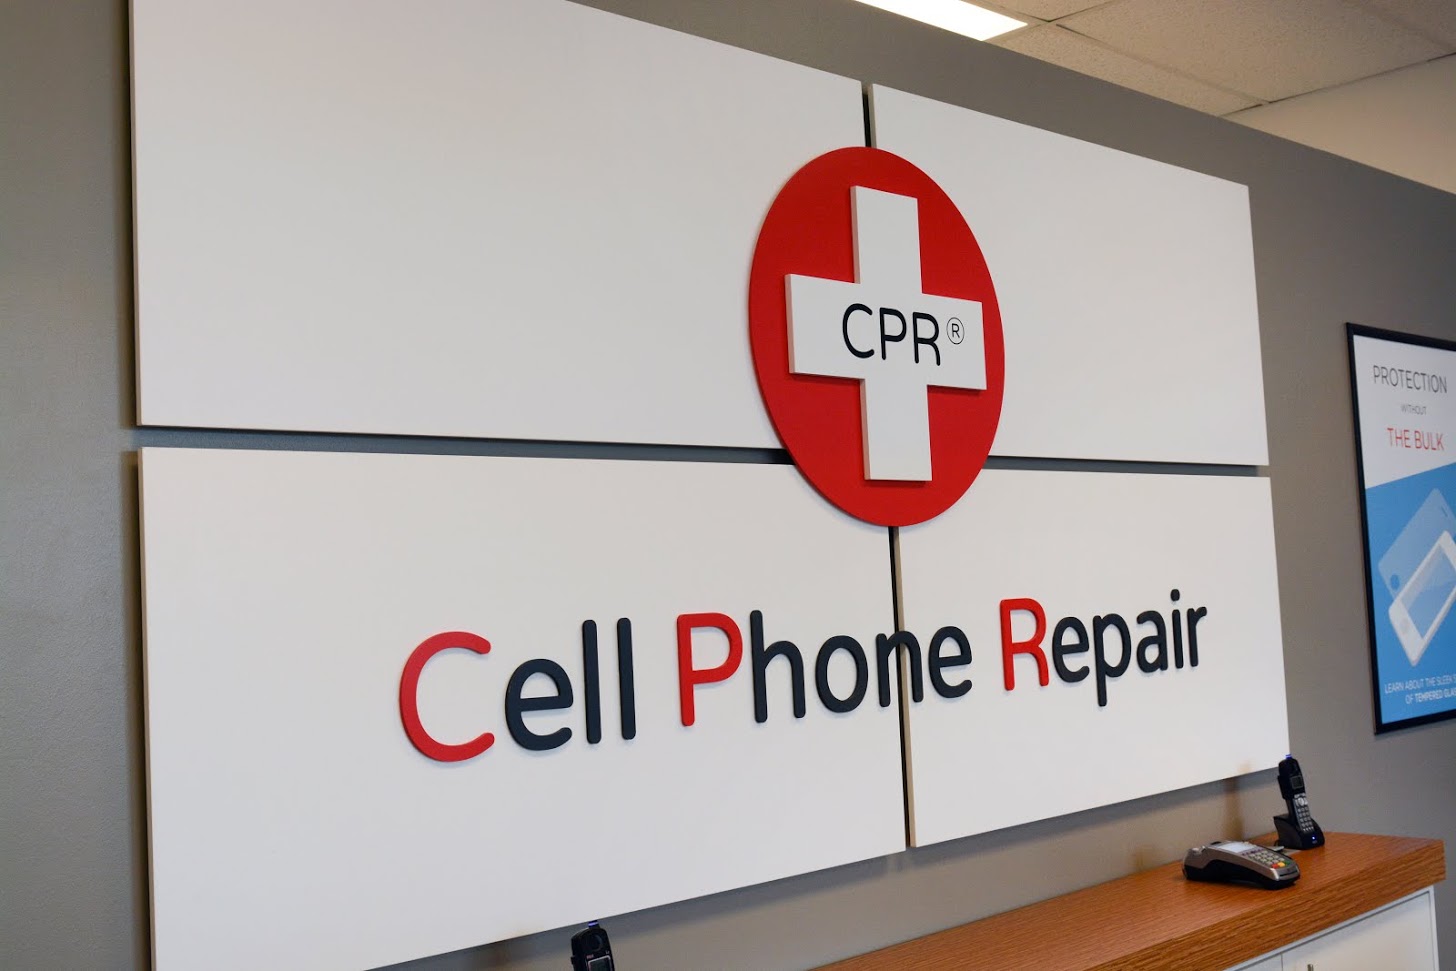 CPR Cell Phone Repair, Wednesday, December 5, 2018, Press release picture